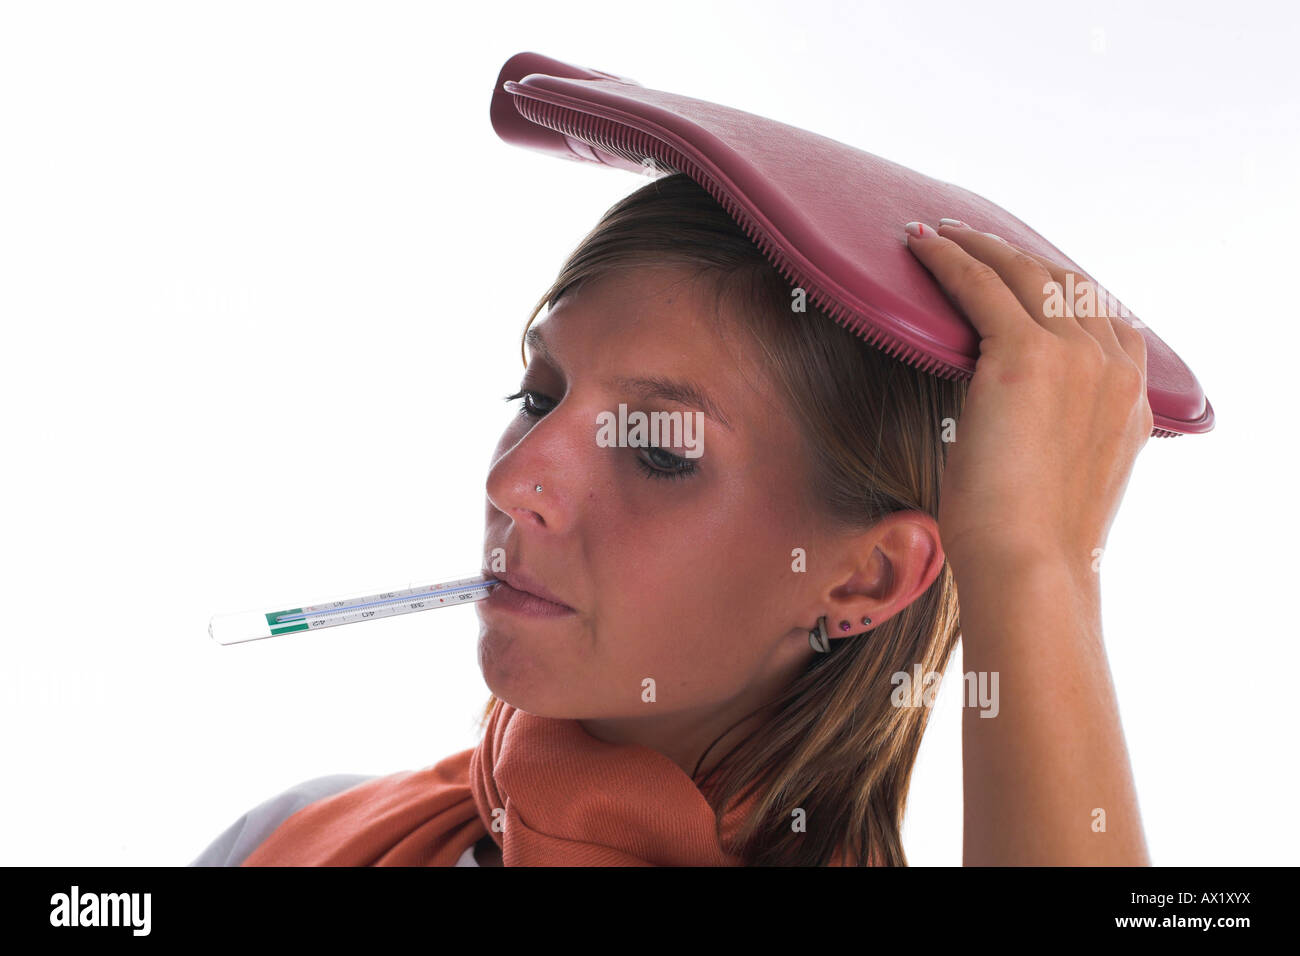 Woman measures the temperature with a thermometer Stock Photo